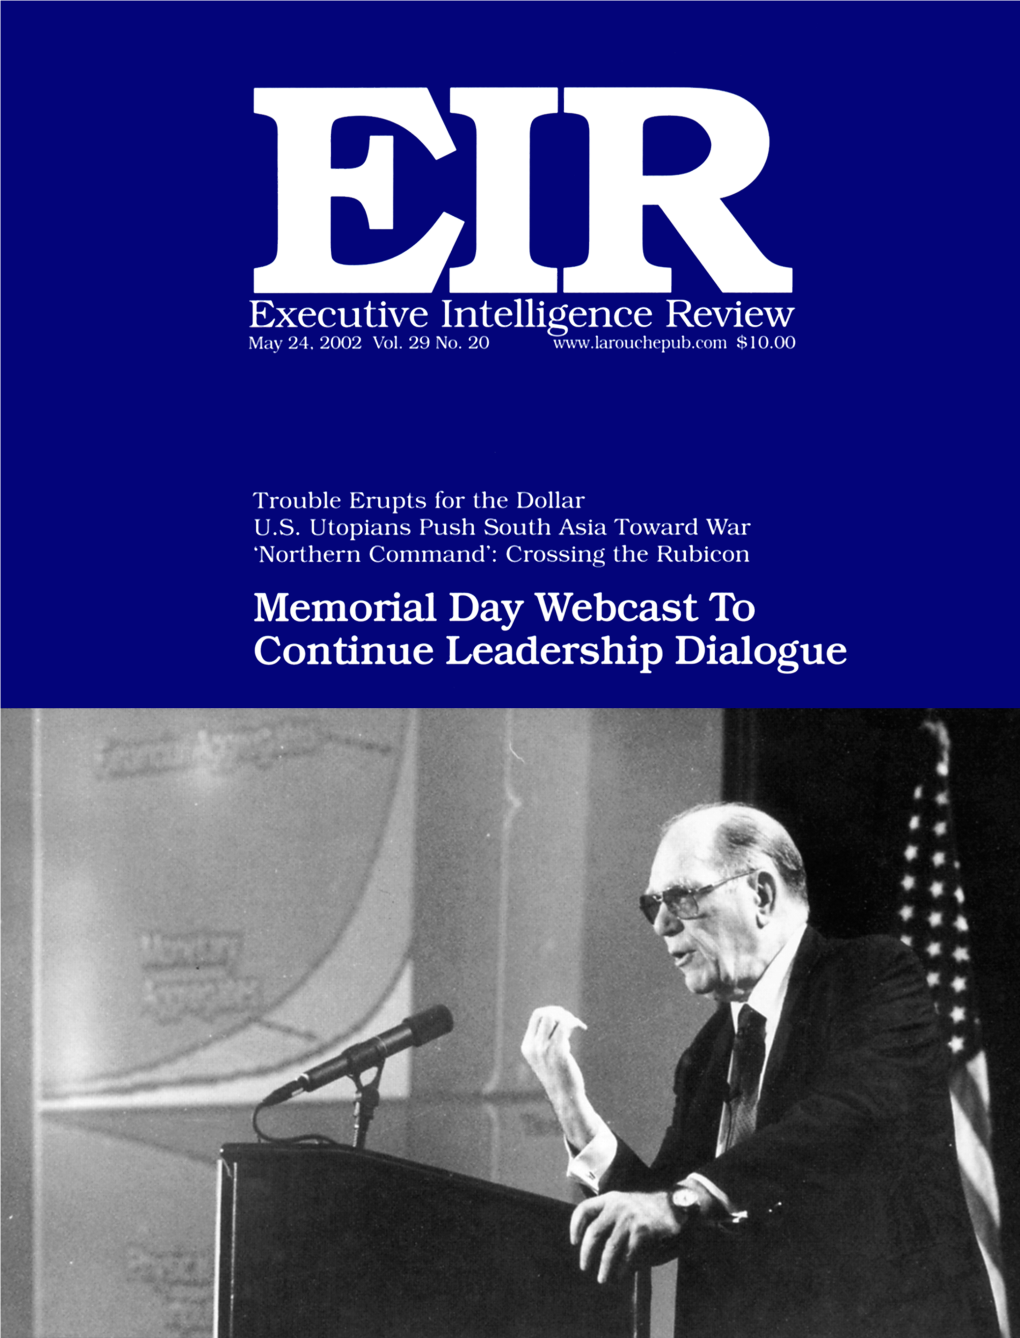 Executive Intelligence Review, Volume 29, Number 20, May 24, 2002